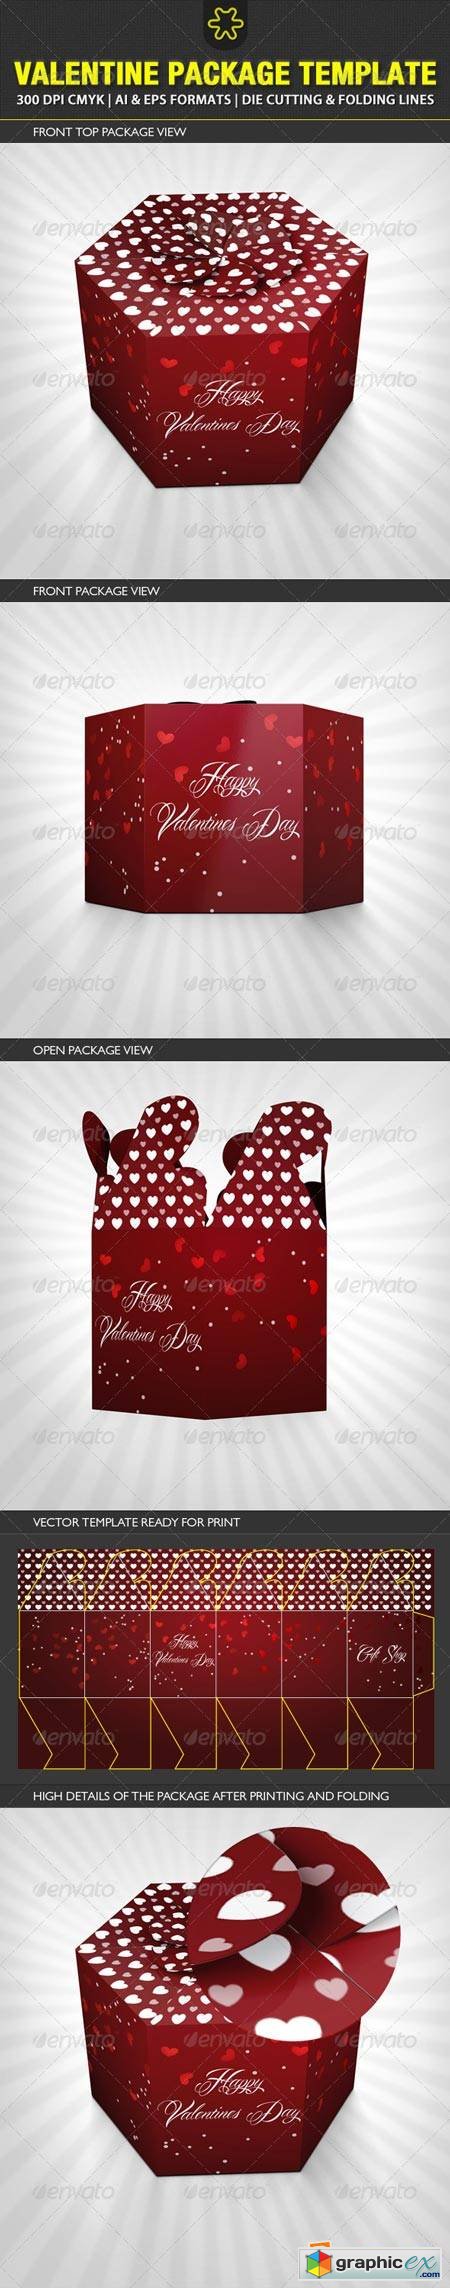 Valentine Package Template